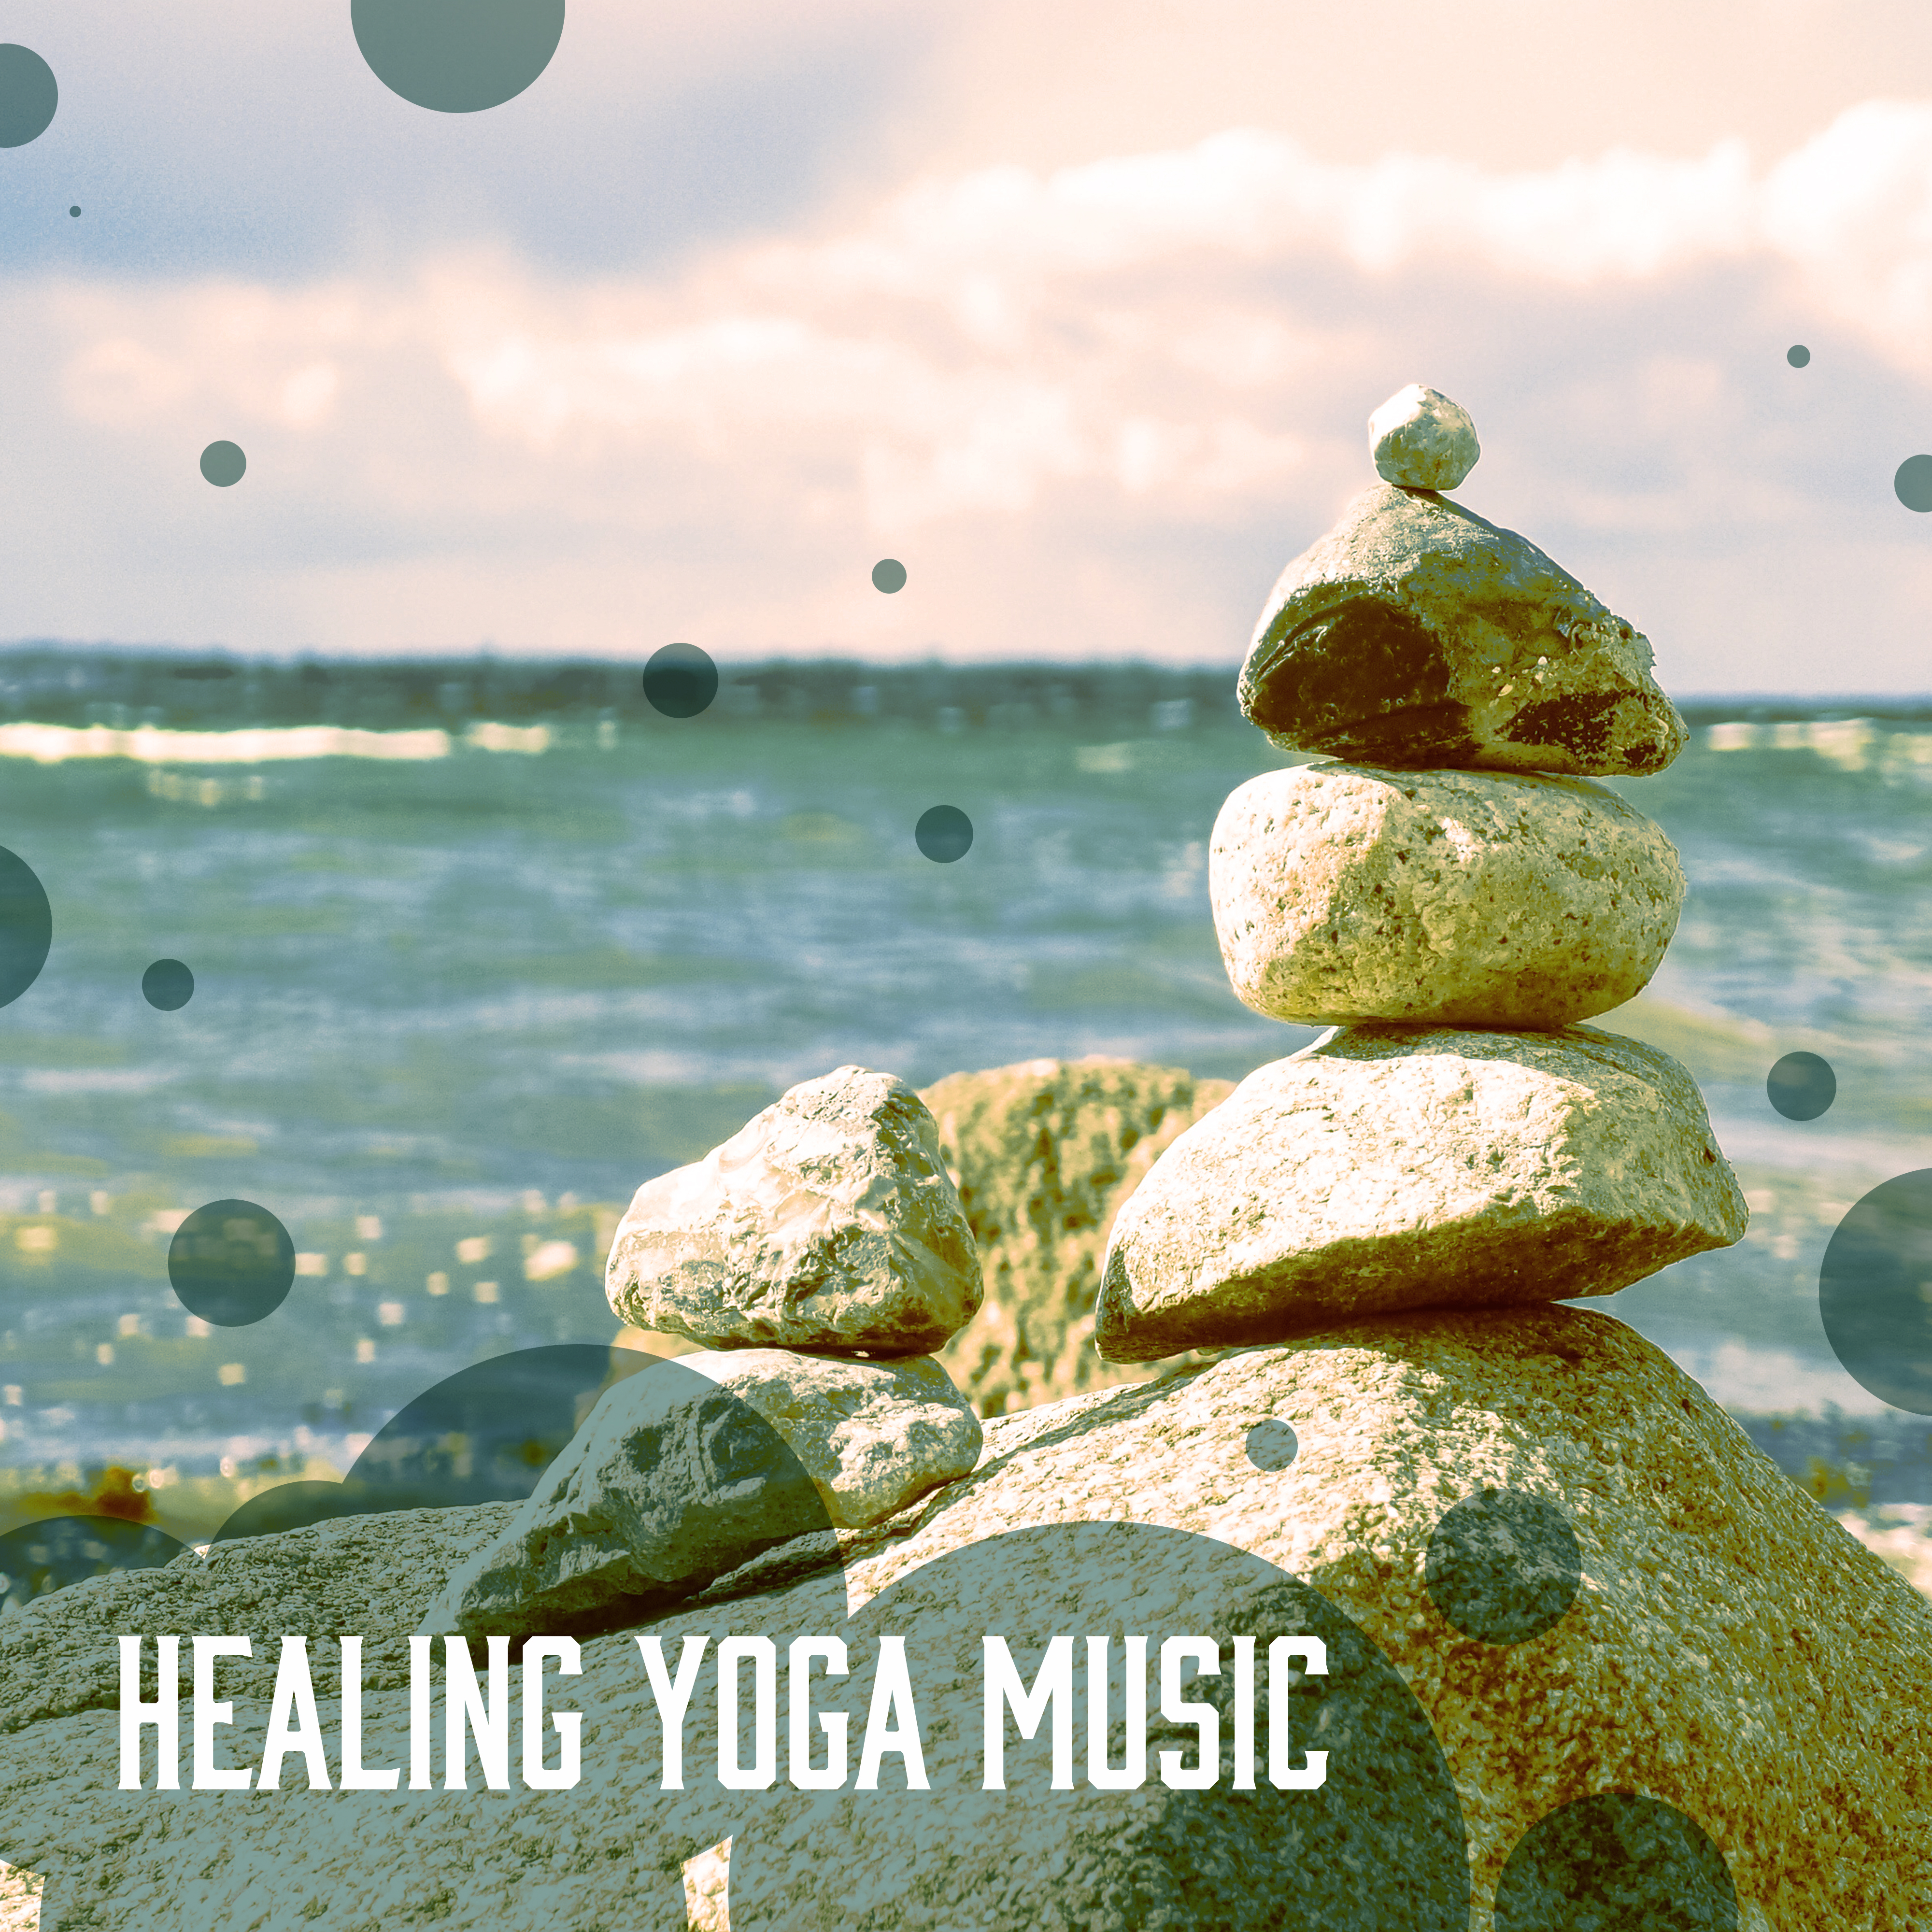 Healing Yoga Music  Deep Relaxing sounds of New Age Music for Yoga Practice, Healing Nature Sounds, New Age Music, Bird Sounds